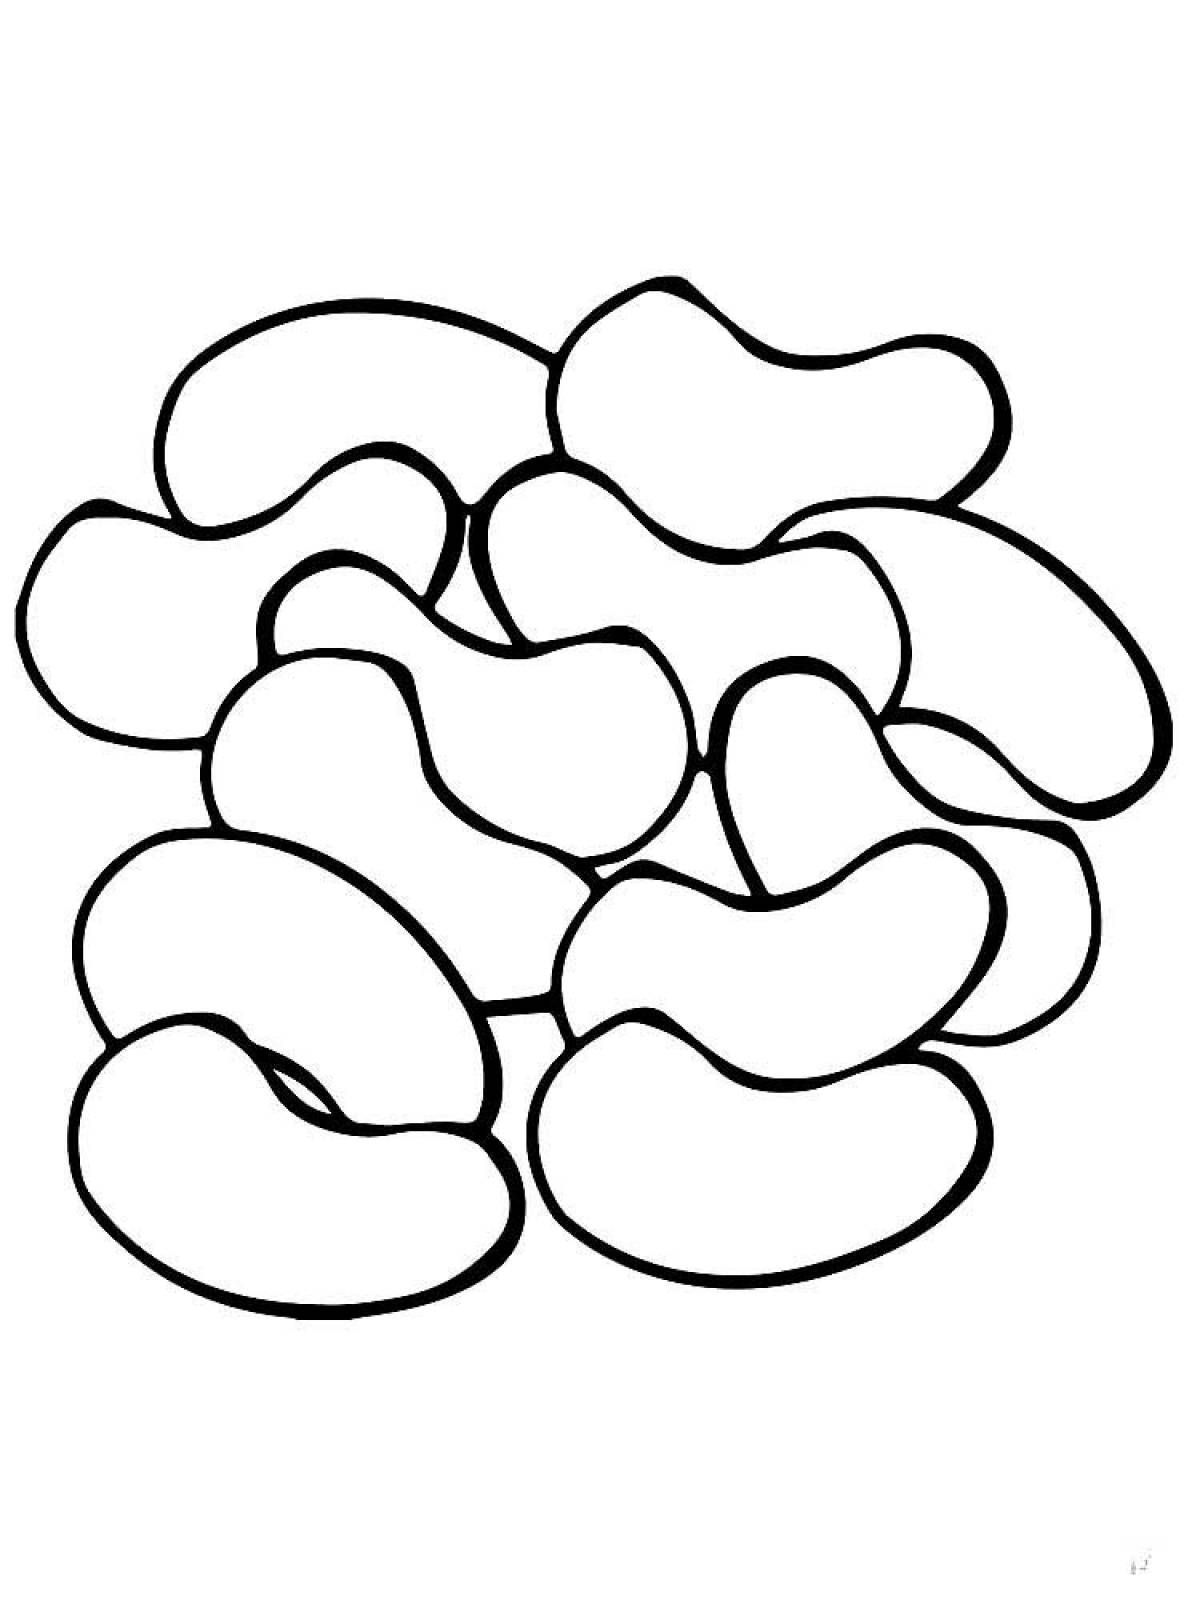 Bean coloring page